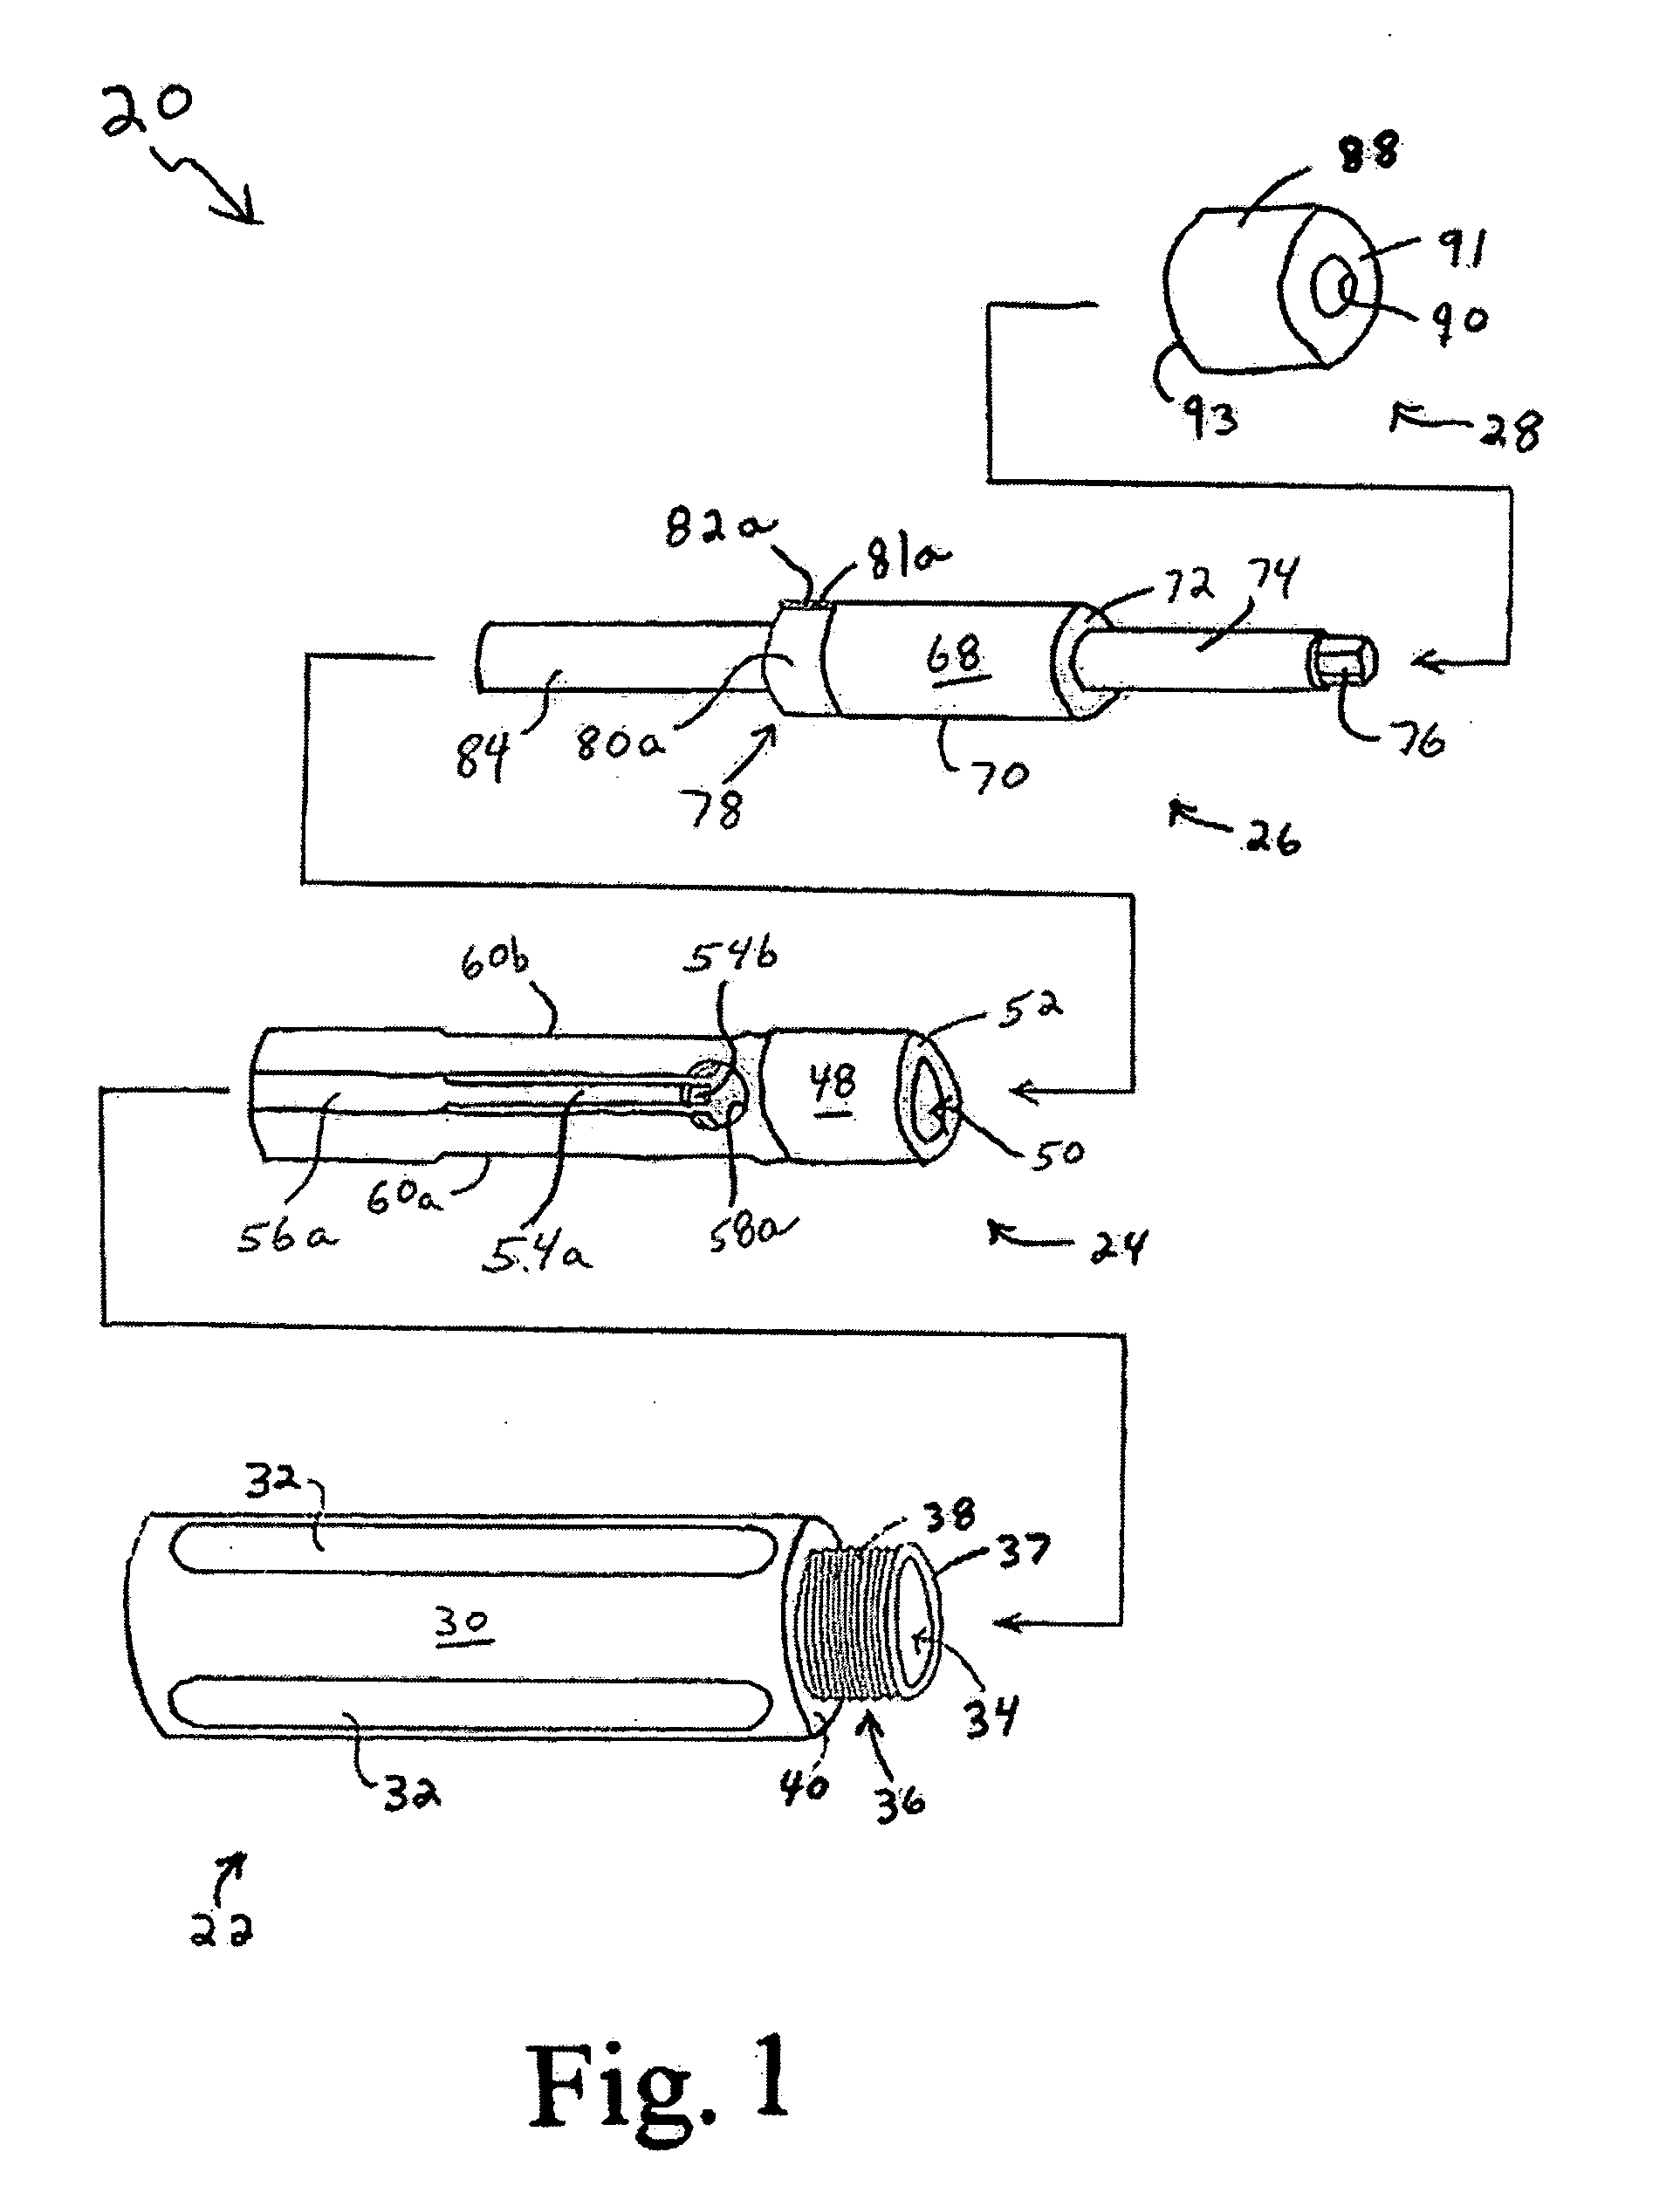 Torque limiting driver with easily disassembled components for sterilization